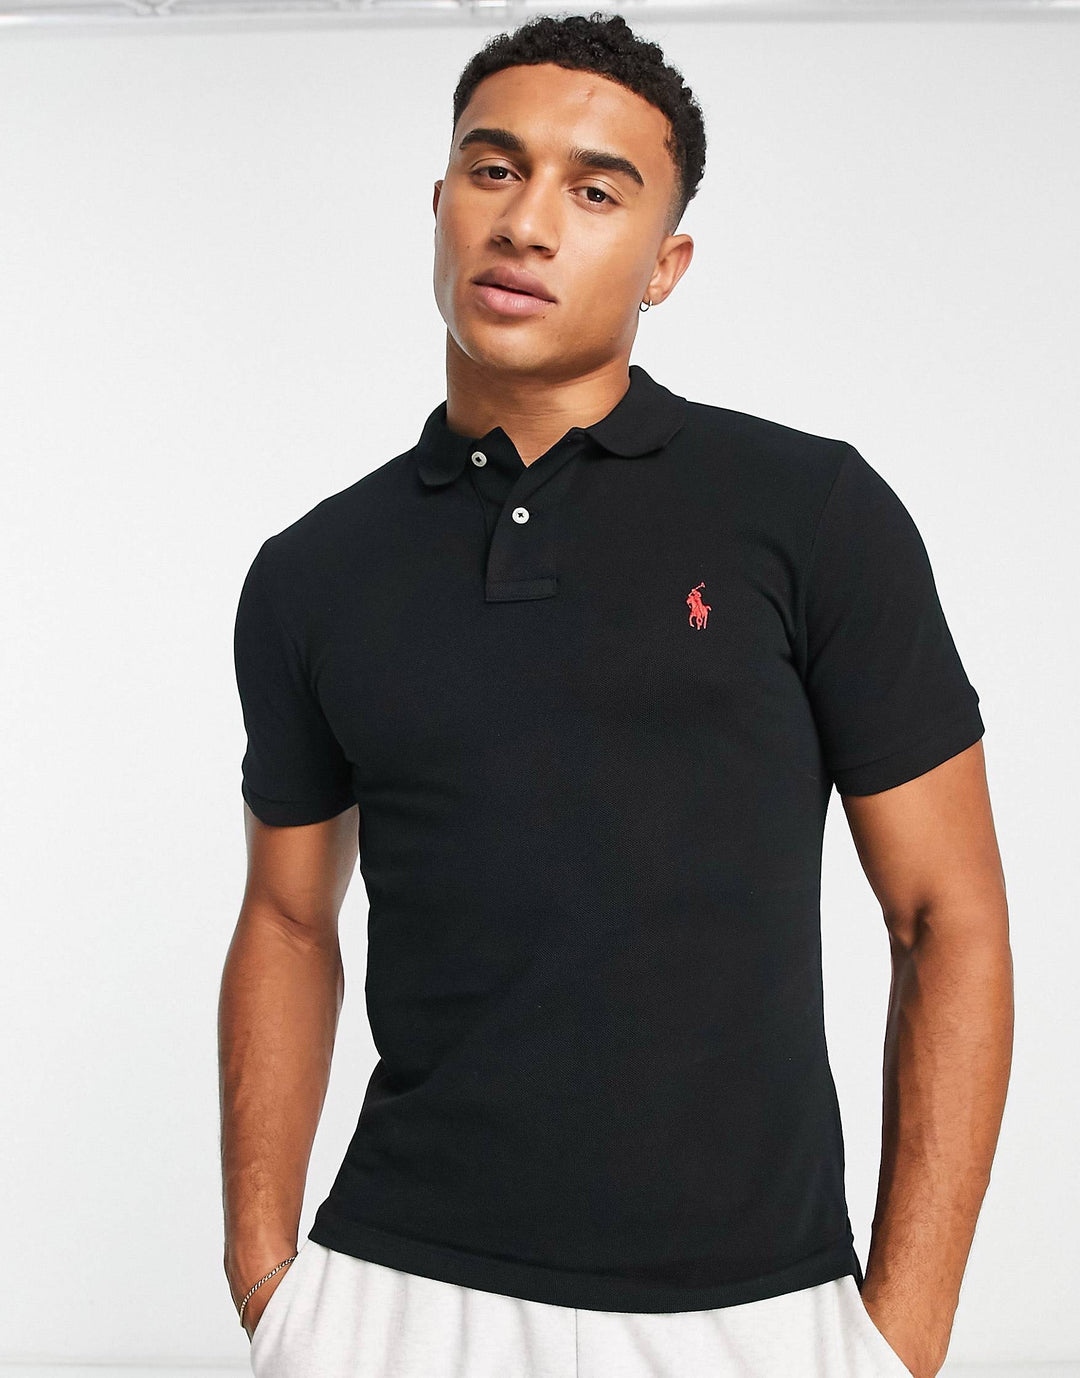 Ralph Lauren black and red slim fit polo shirt